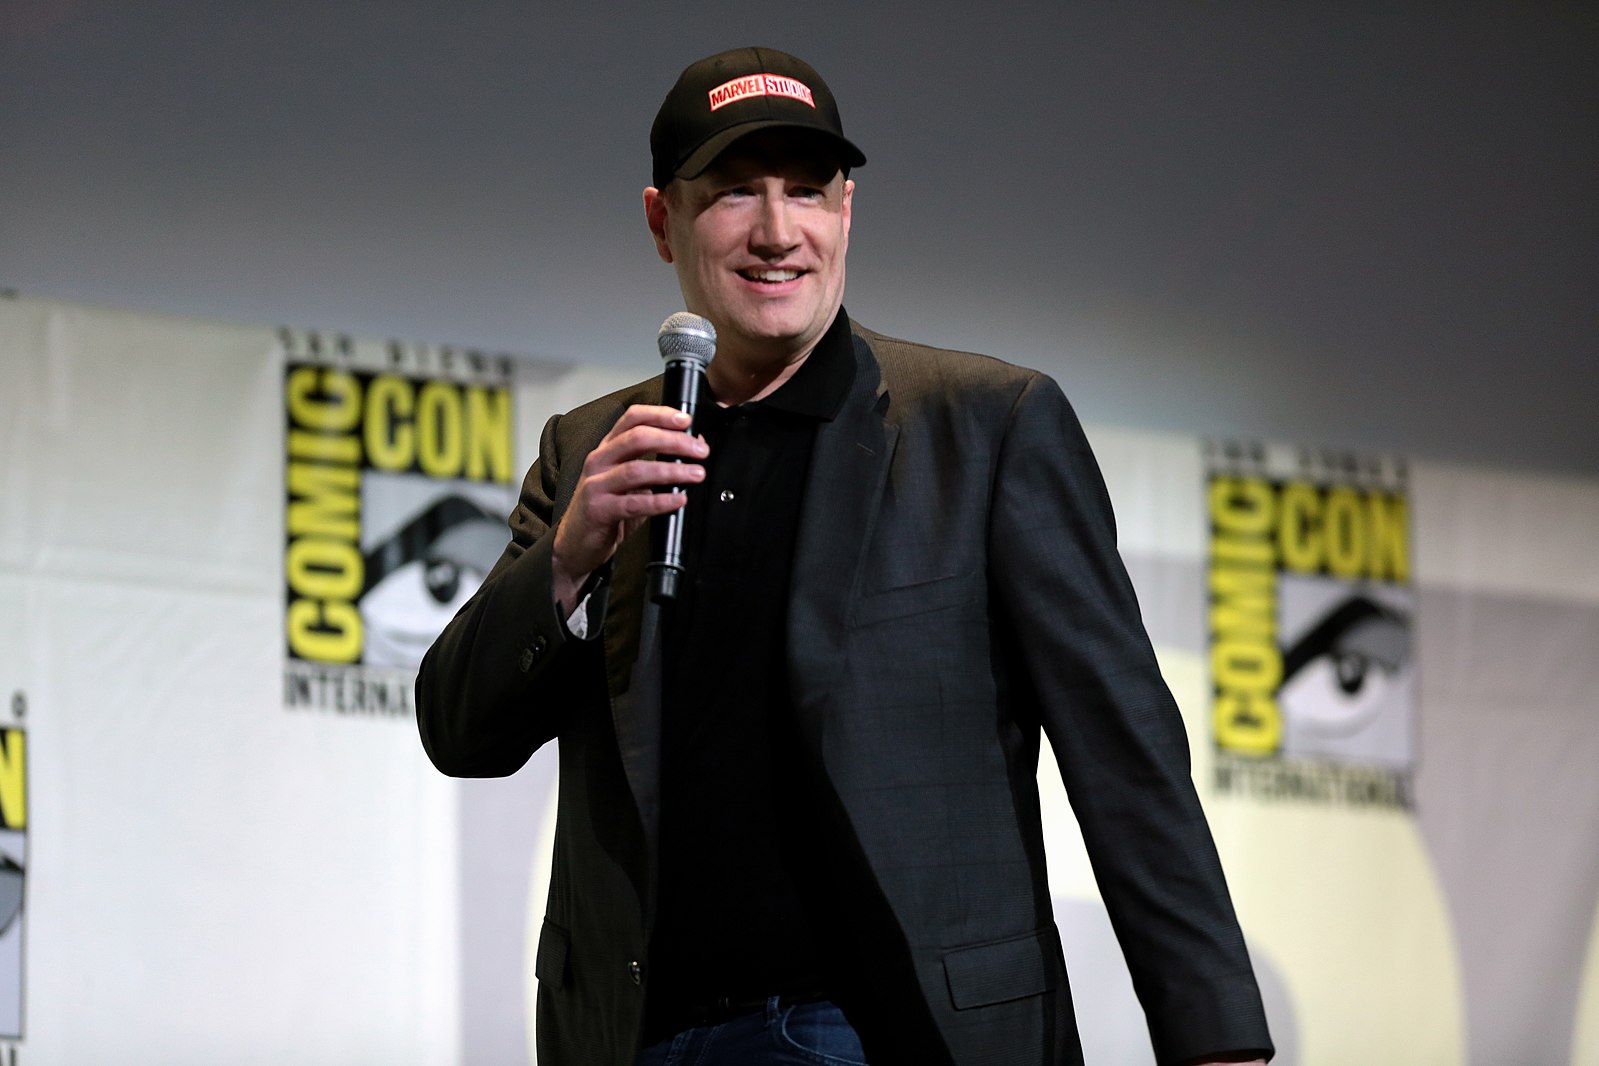 Kevin Feige Coy On X-Men – Confirms No Star Wars Movie – Denies Discussing Returning Fallen Avengers